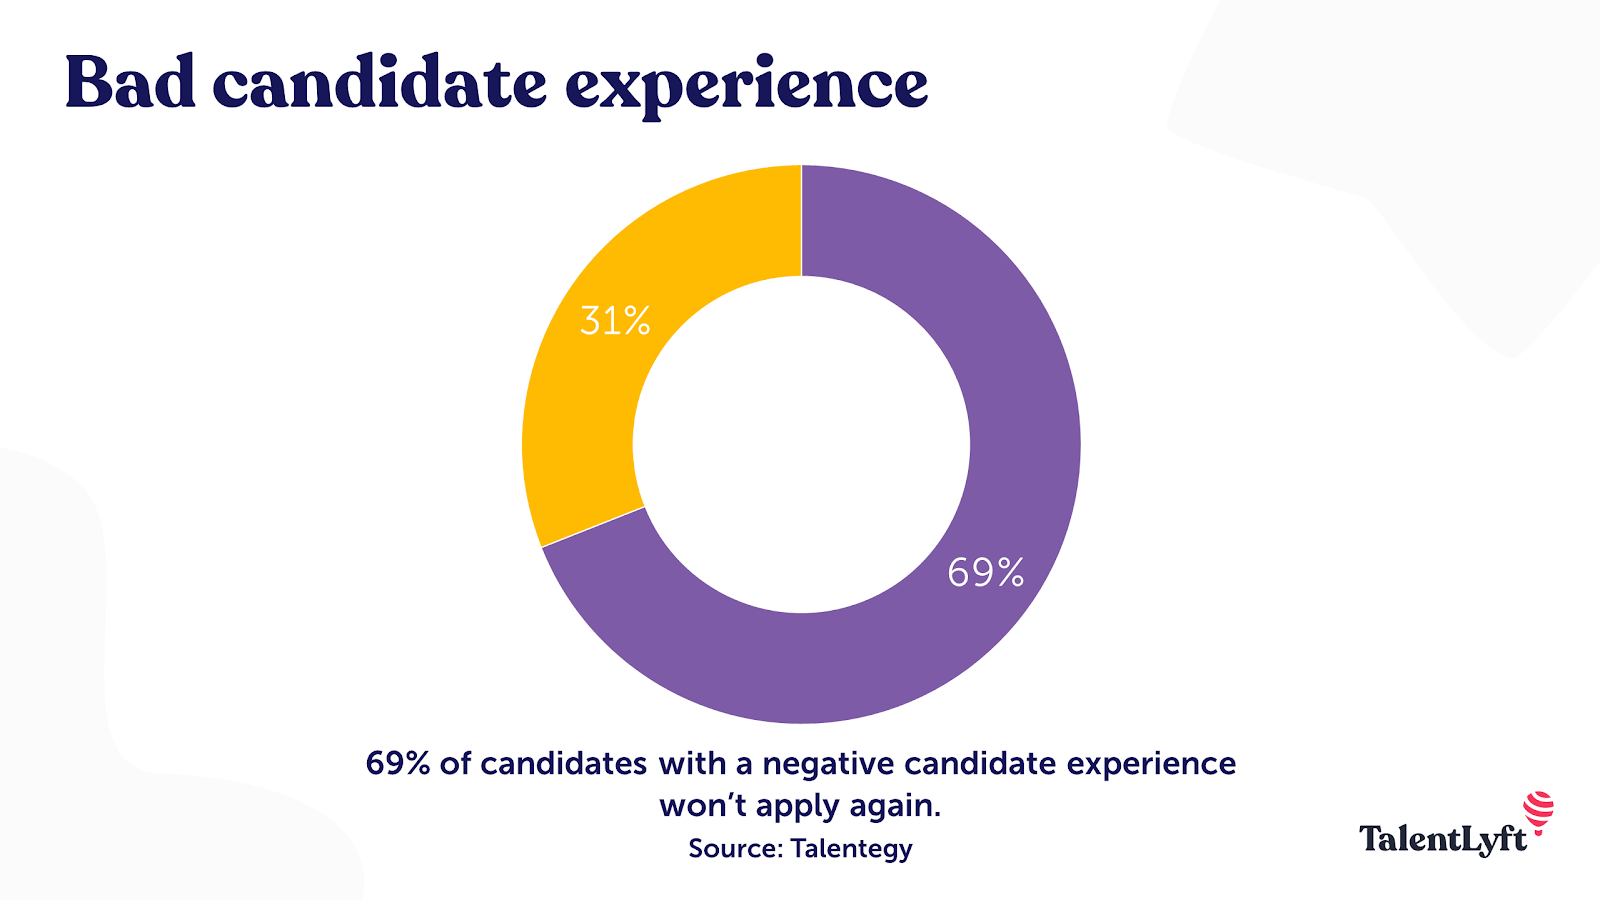 Bad candidate experience